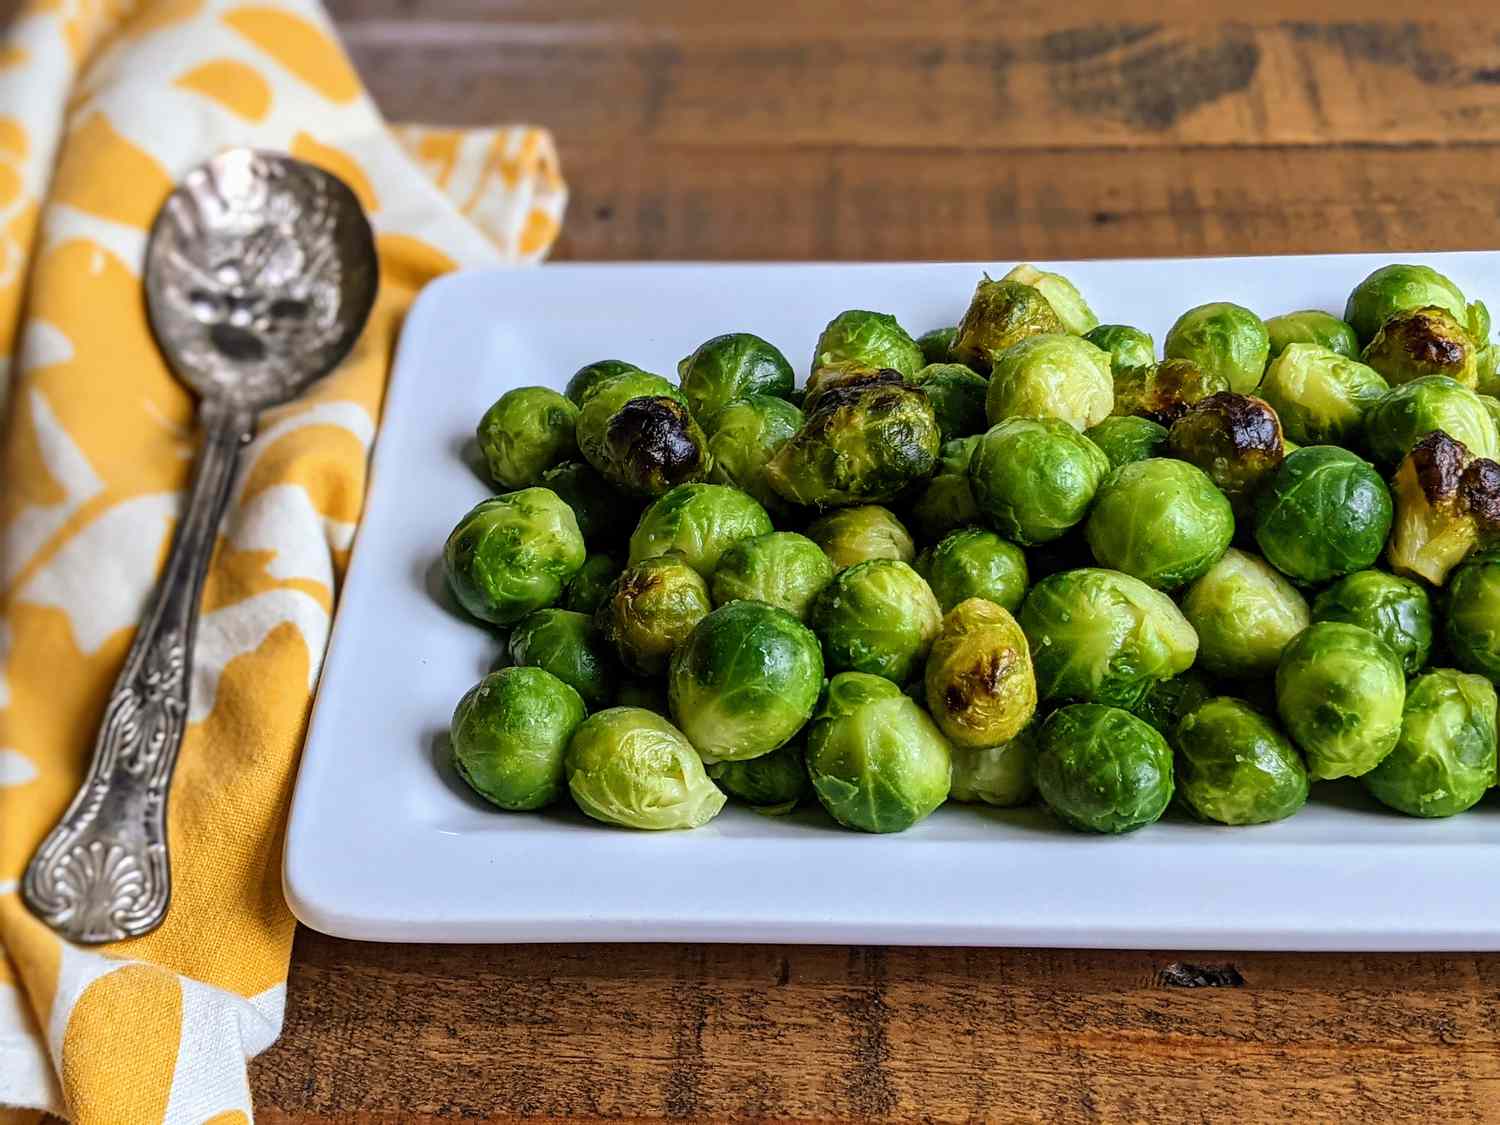 Rang Brussels sprouts